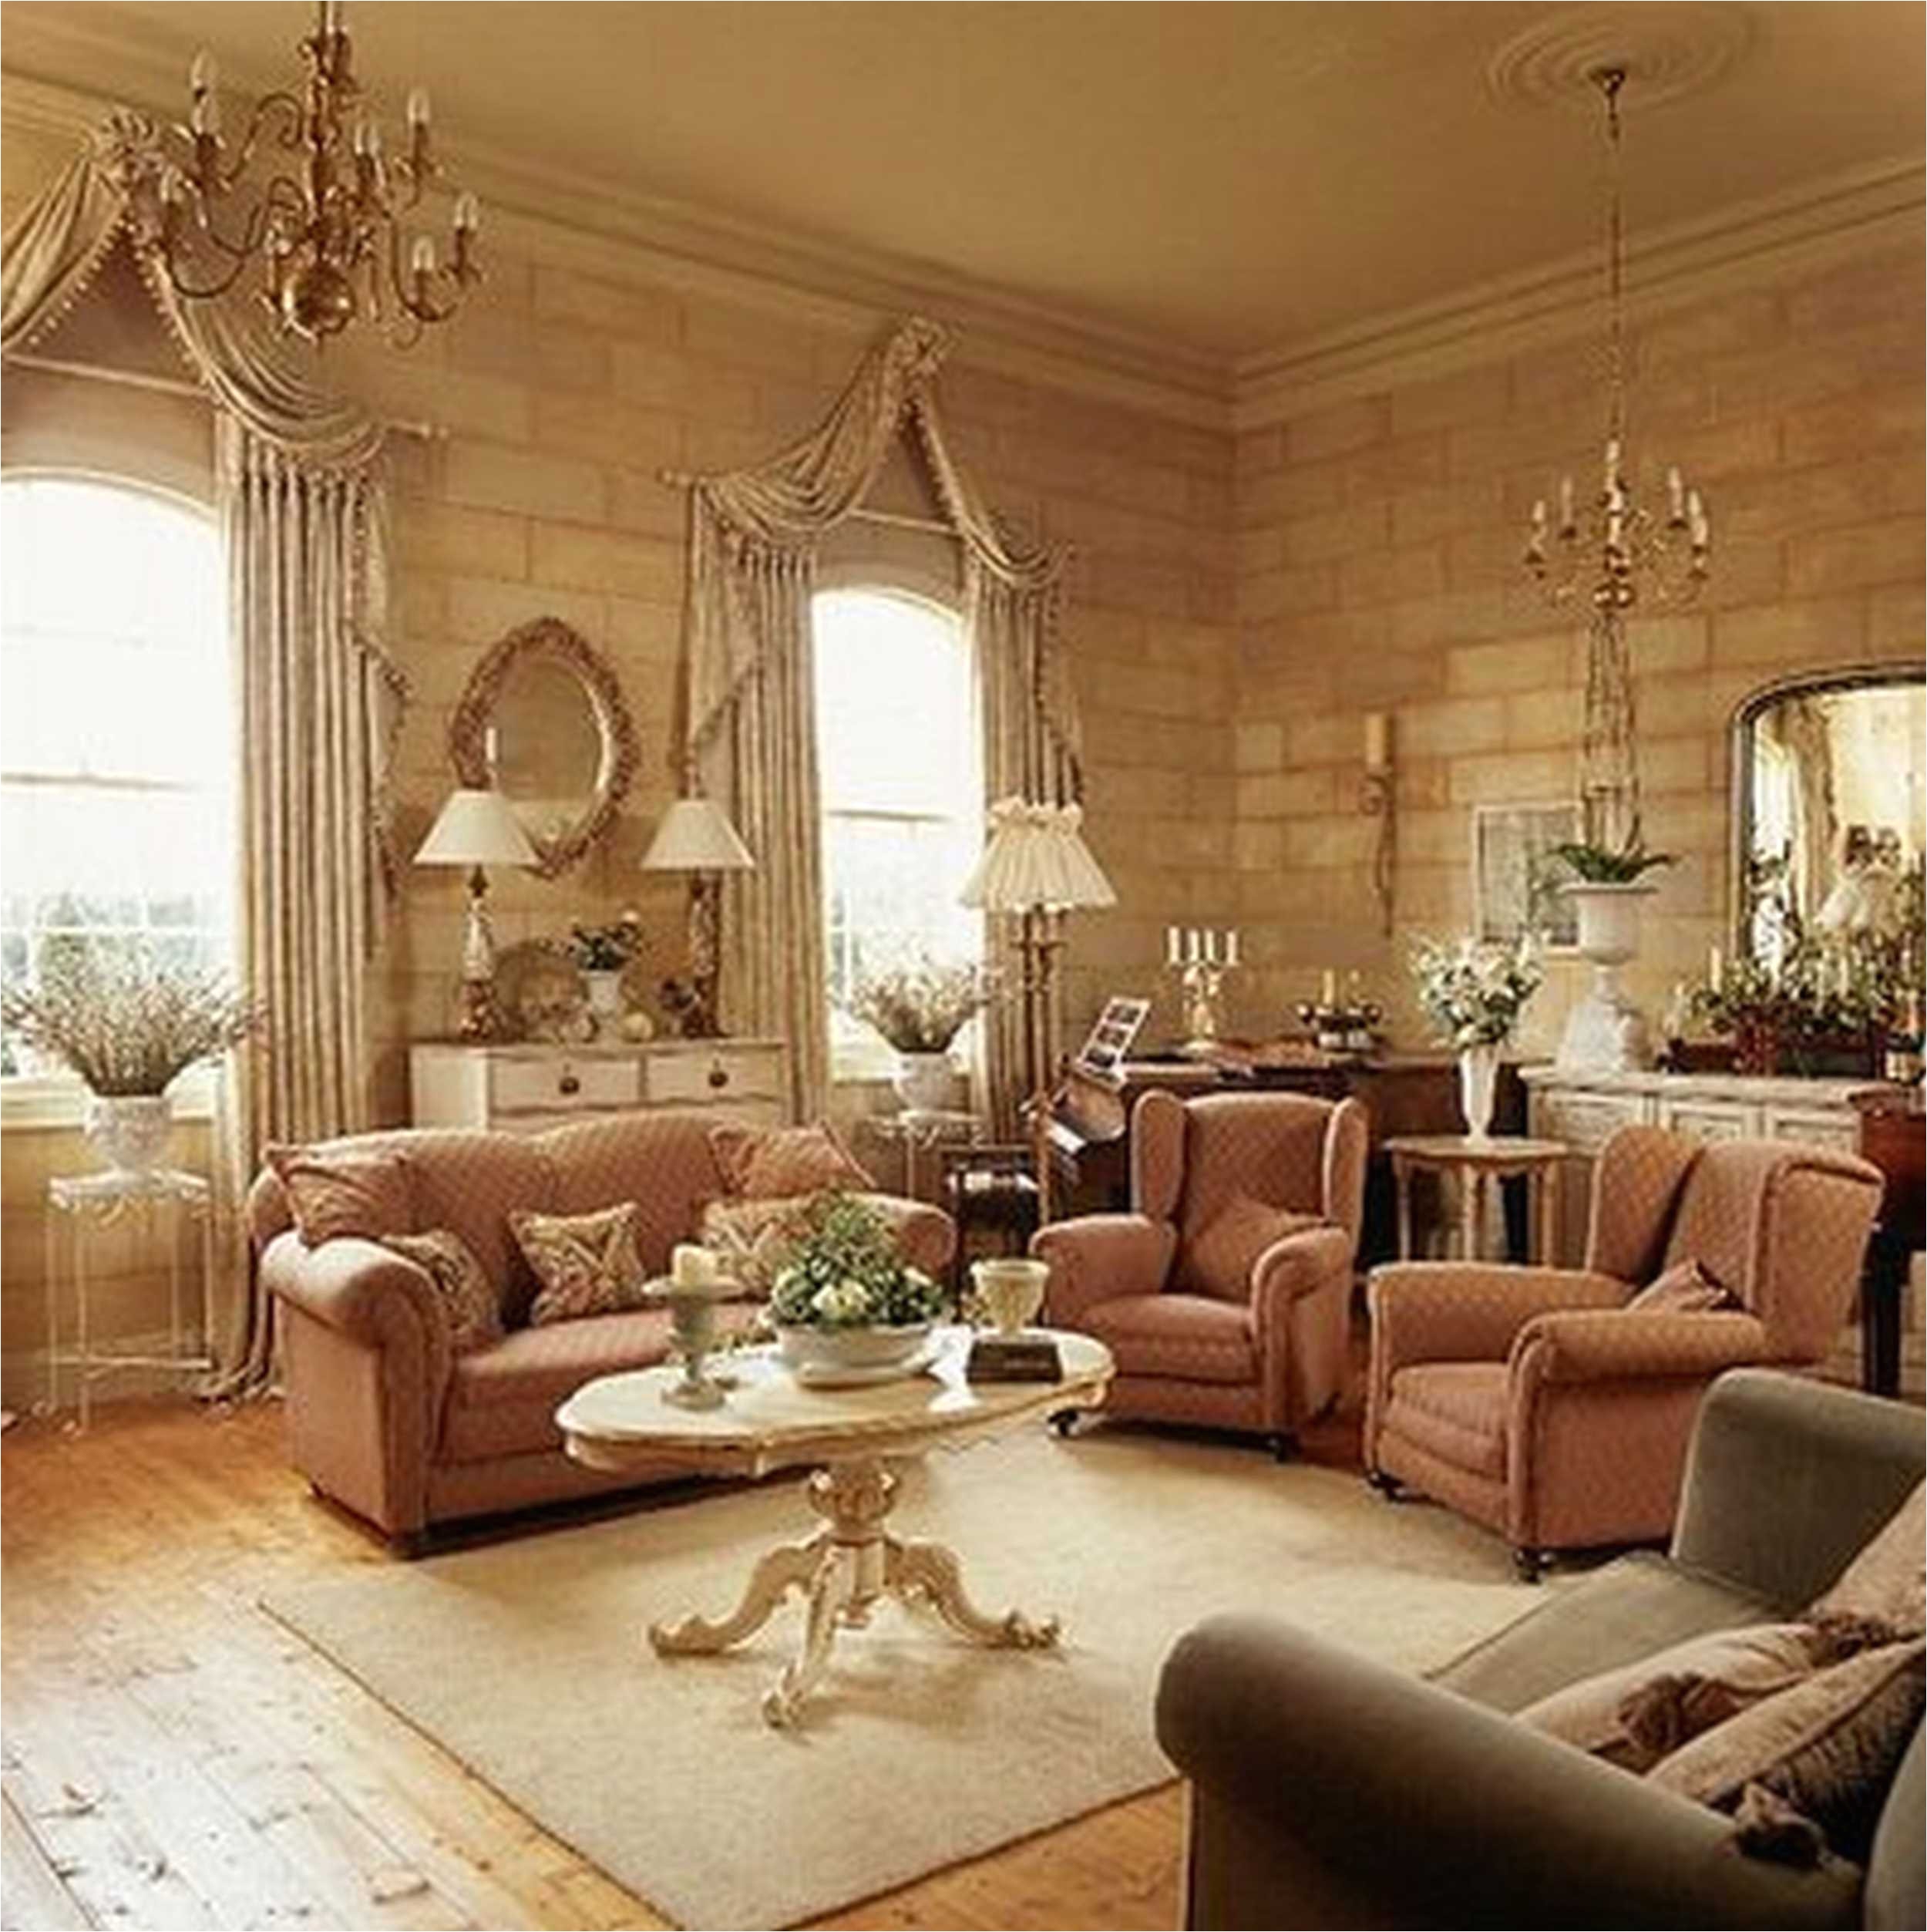 Contemporary Living Room Wall Decor Ideas Best Living Room Traditional Decorating Ideas Awesome Shaker Chairs